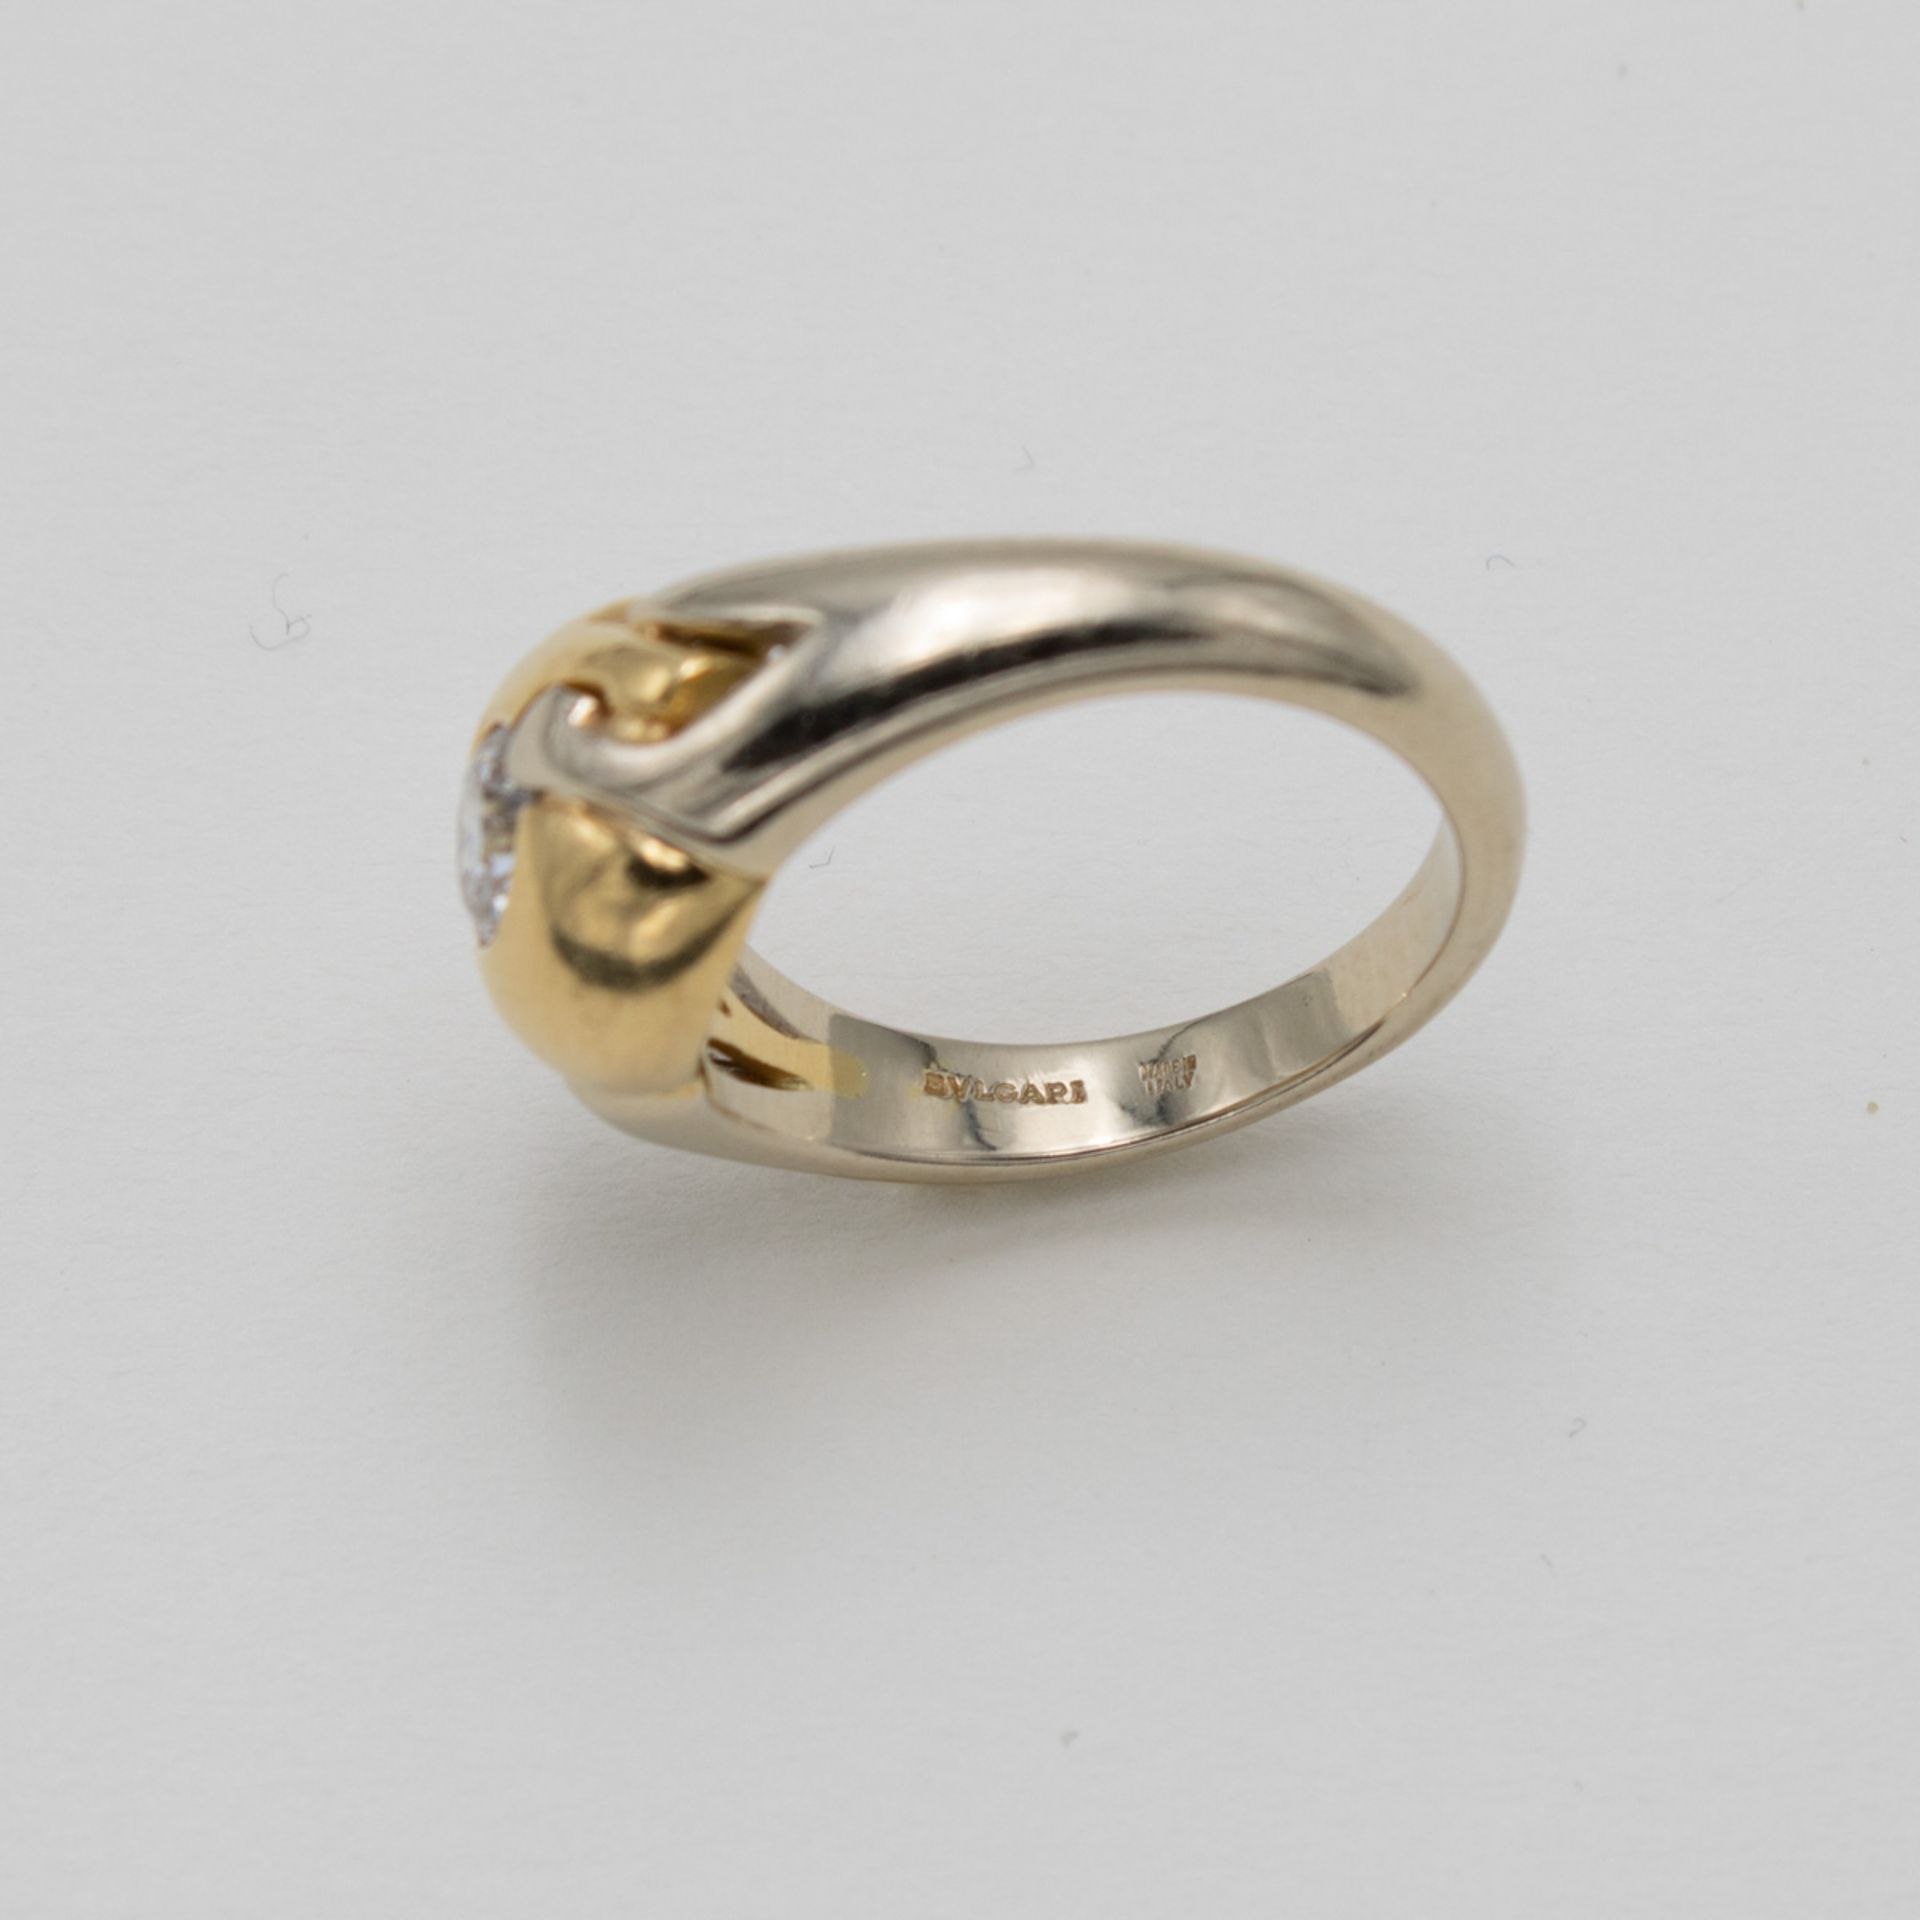 Bulgari 18kt two color gold ring - Image 2 of 2